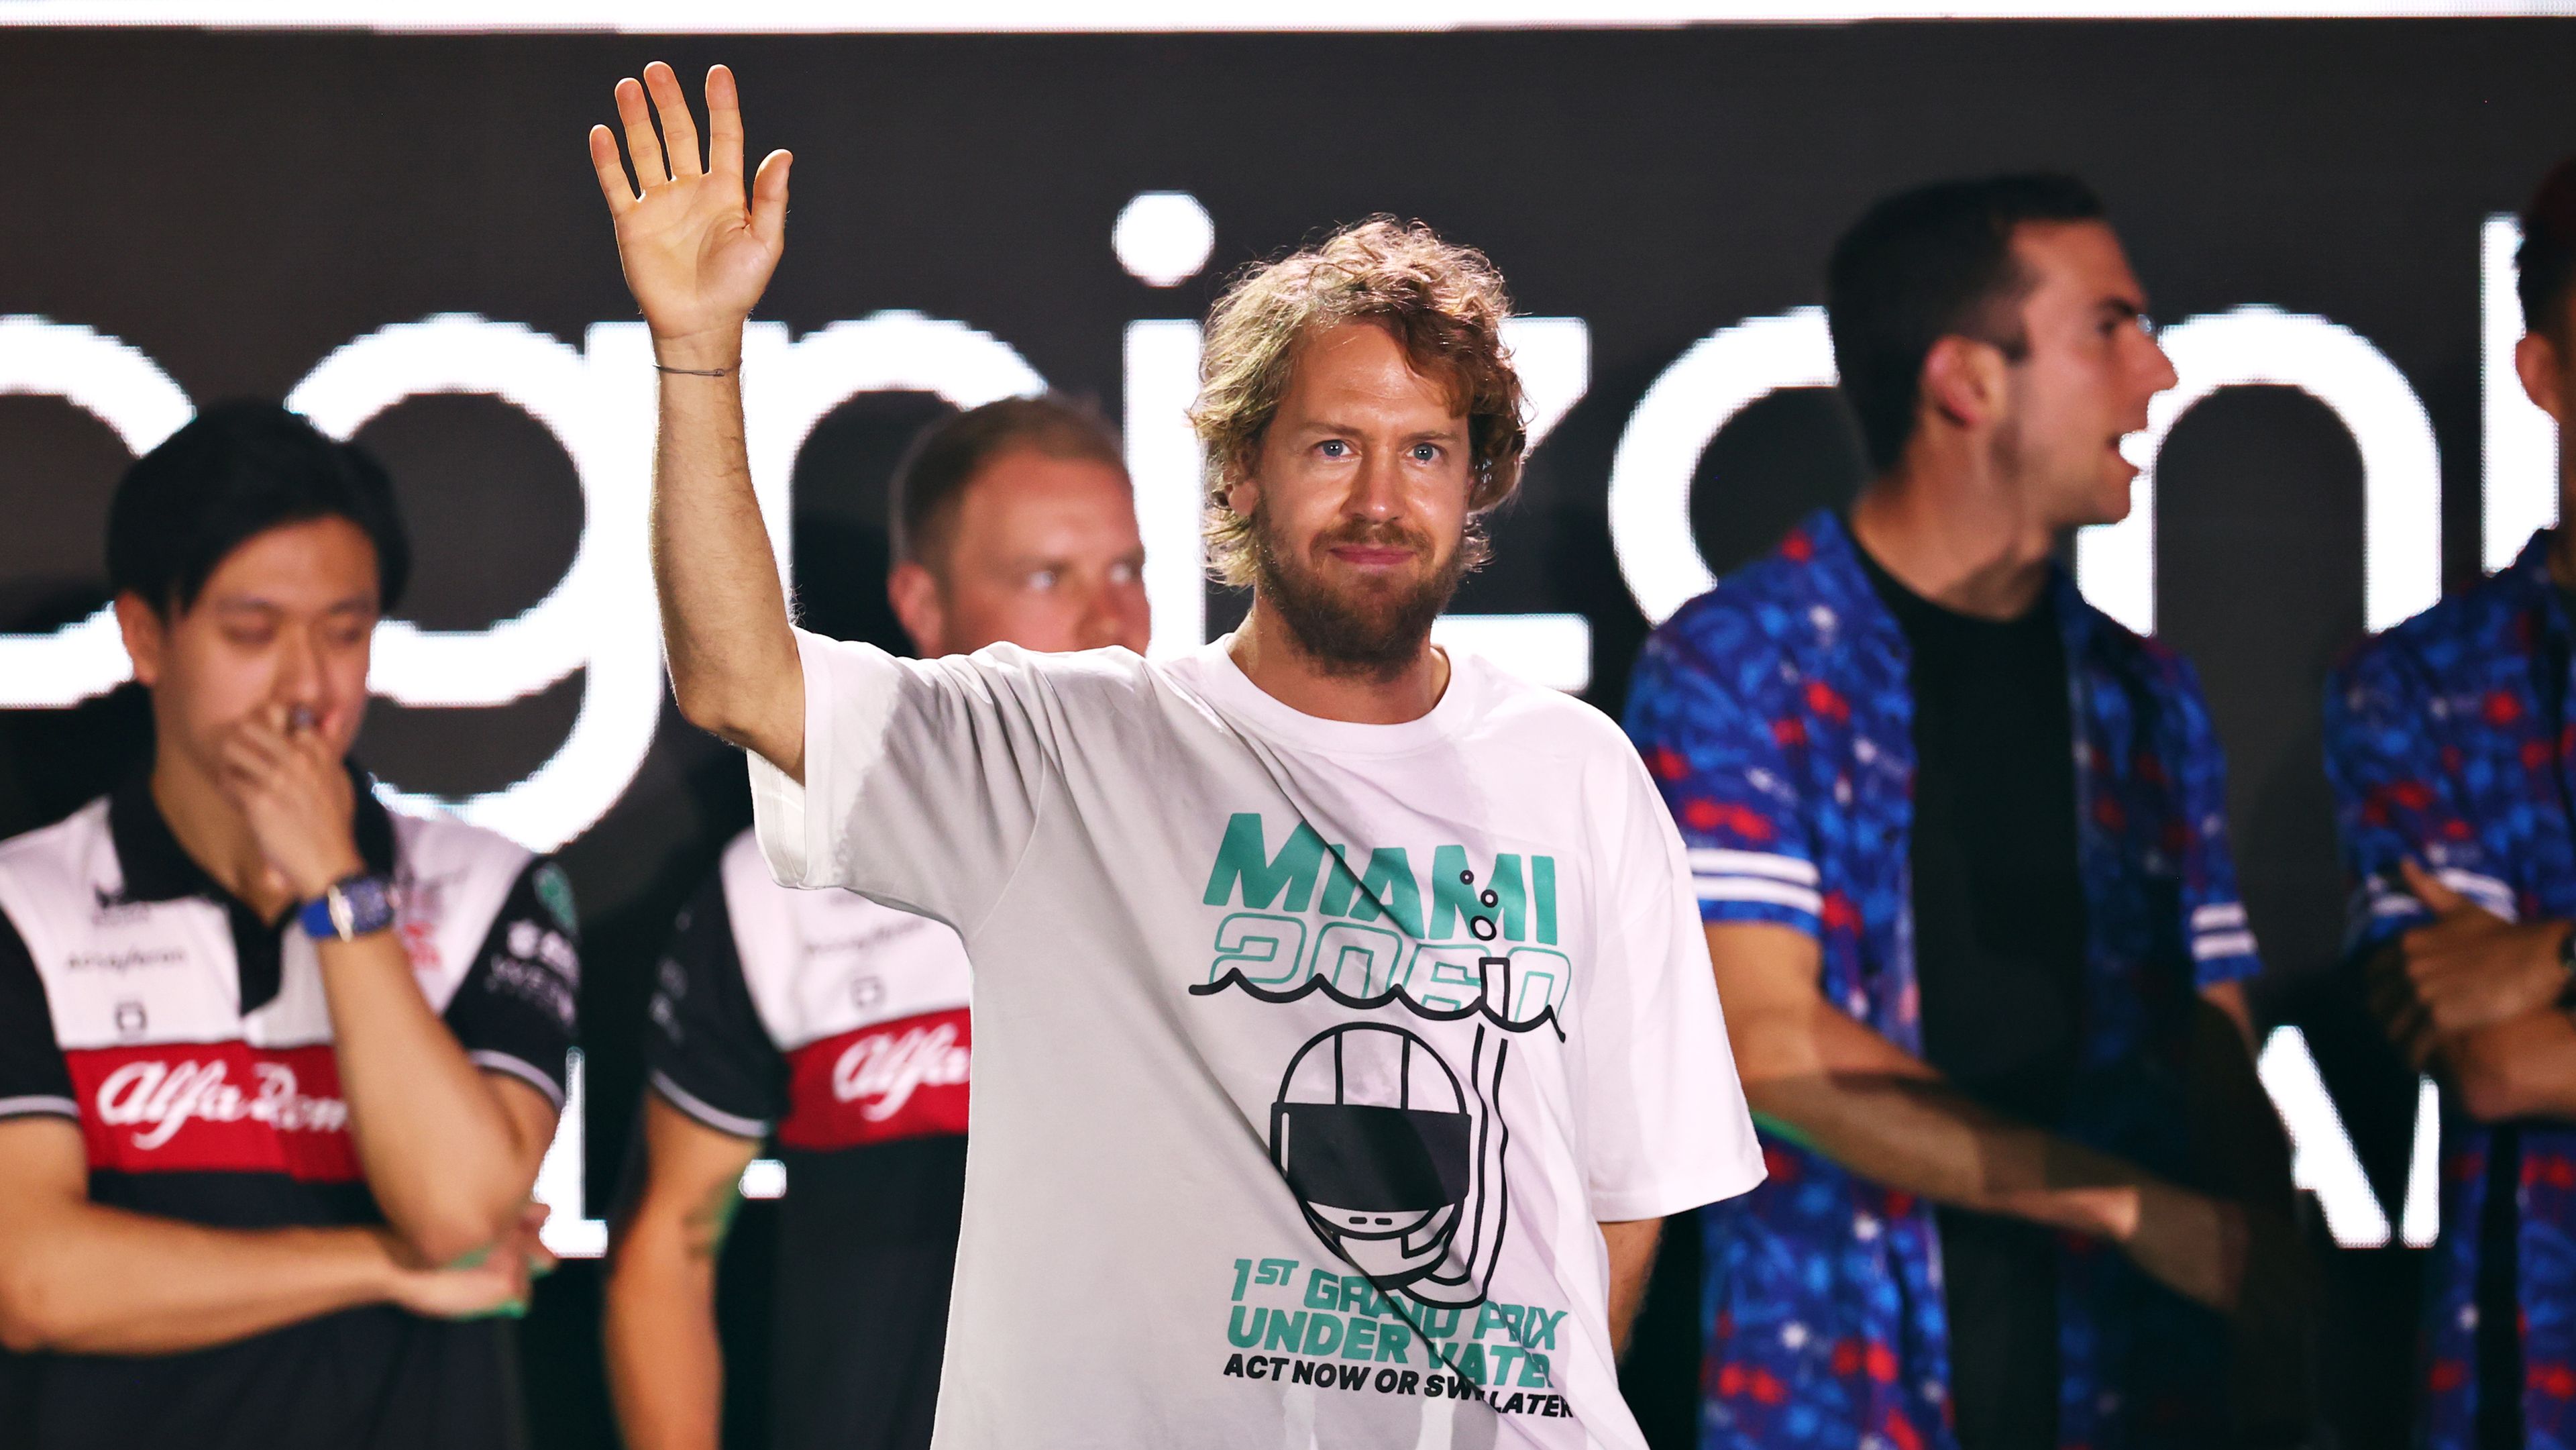 Sebastian Vettel waves to the crowd at the Miami Grand Prix launch party.